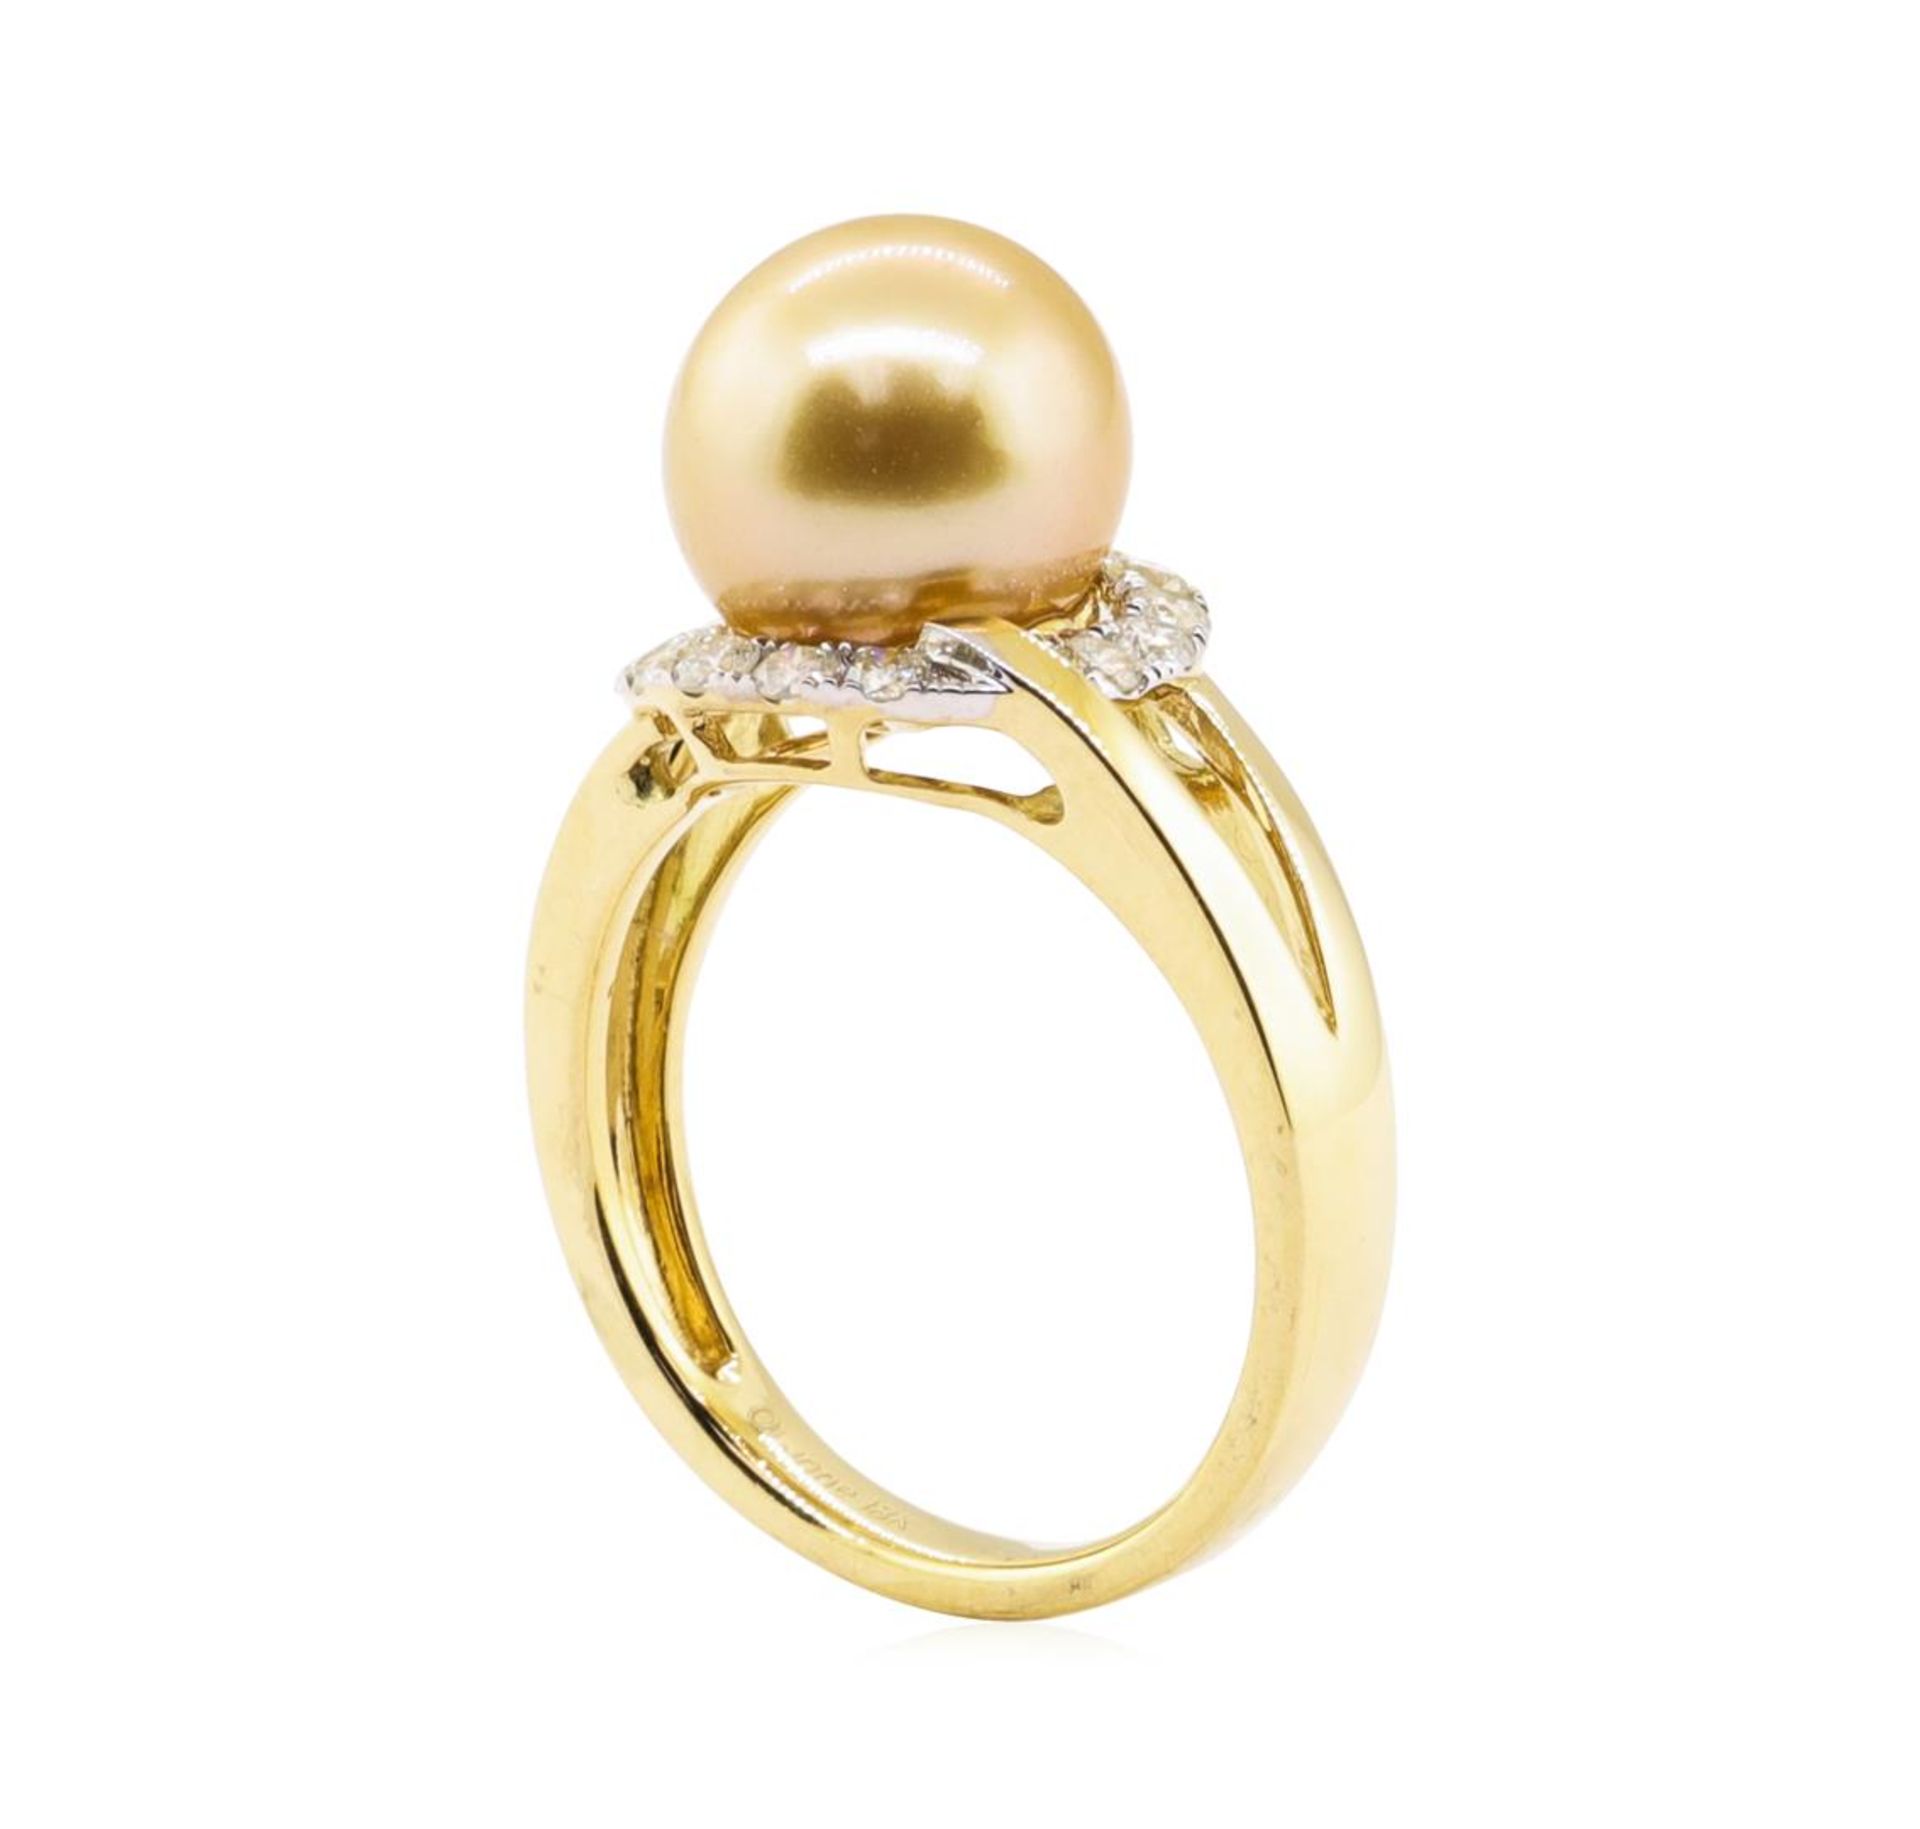 South Sea Pearl and Diamond Ring - 18KT Yellow Gold - Image 4 of 5